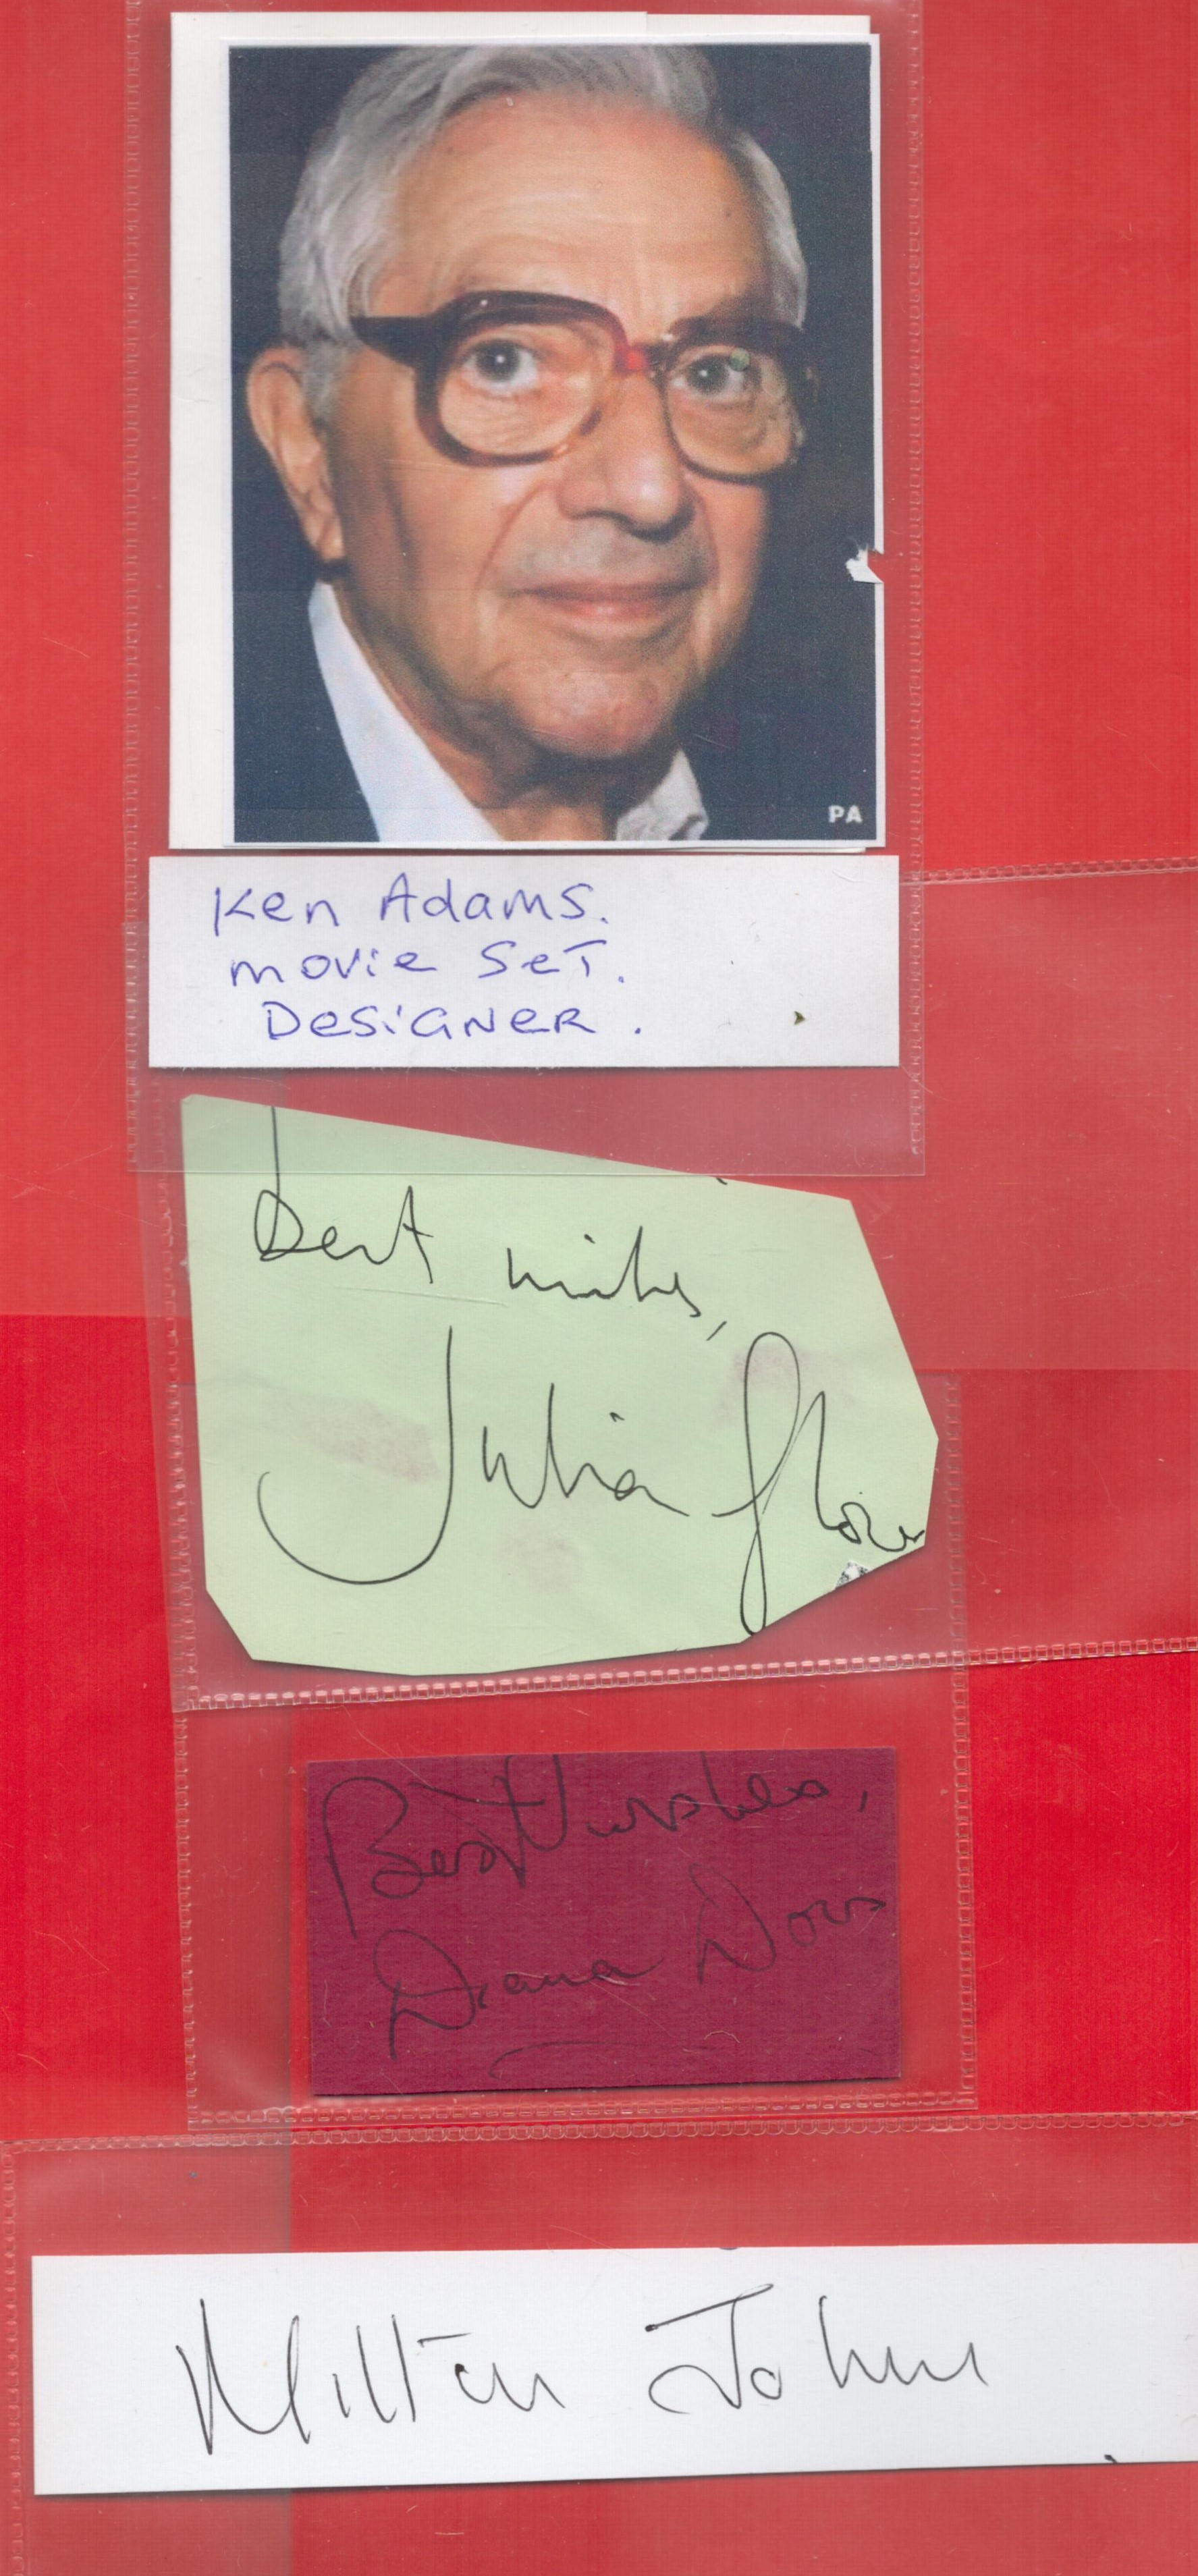 Autograph Collection of 12 Signatures on Signature Cards. Signatures including Richard Todd, - Image 2 of 2